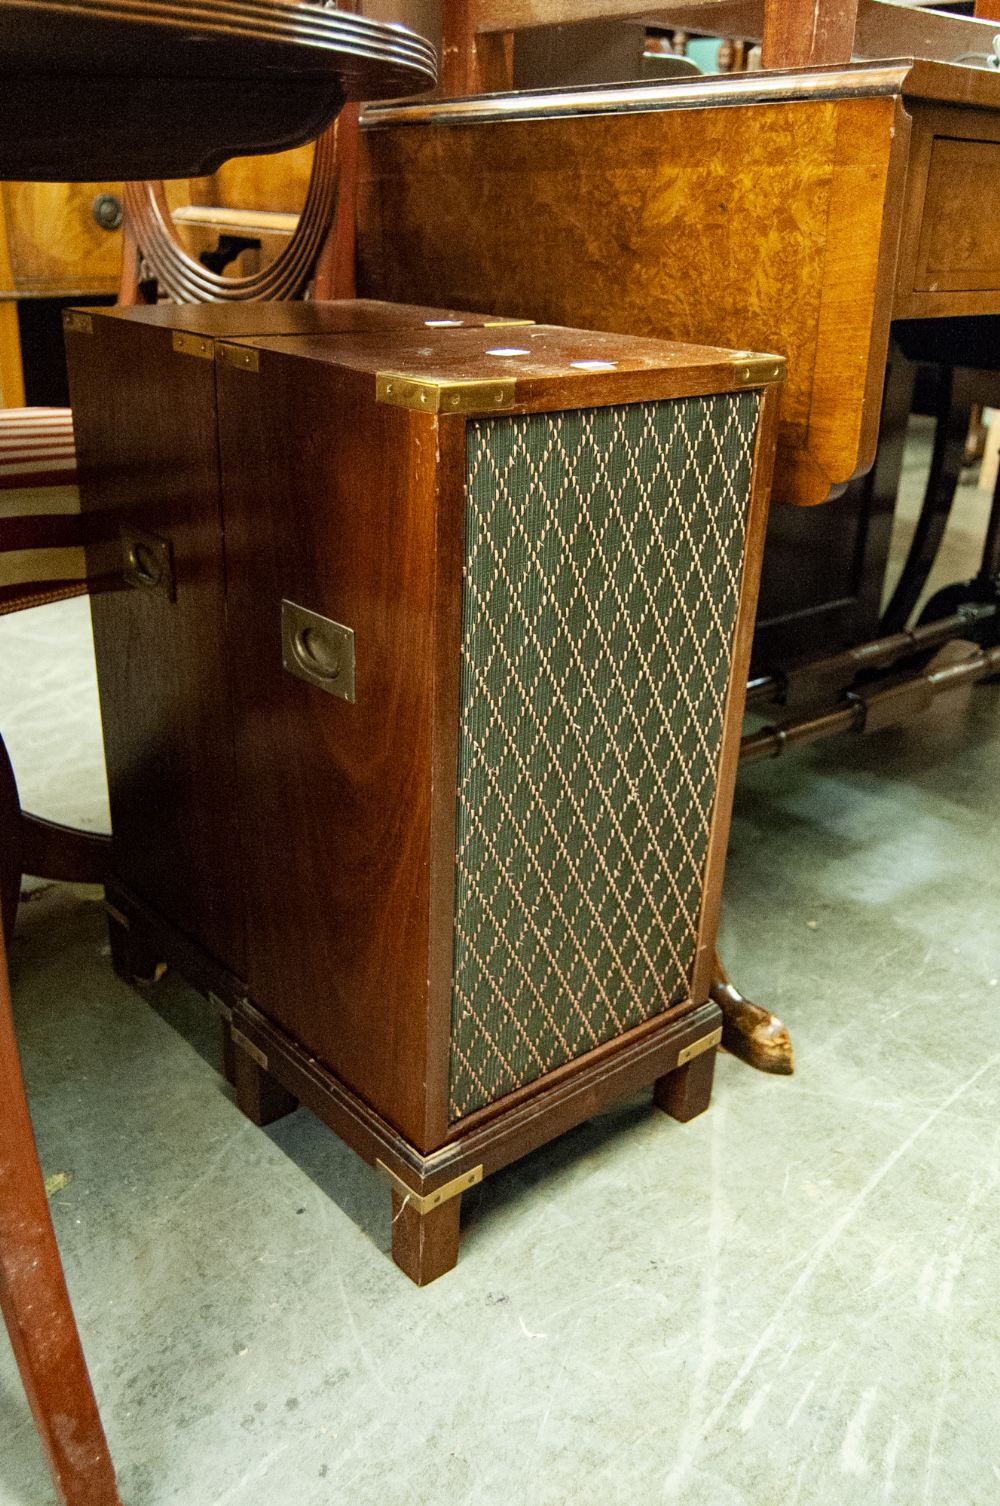 A MAHOGANY CASED GOLDRING DYNATRON RECORD PLAYER - Image 2 of 2